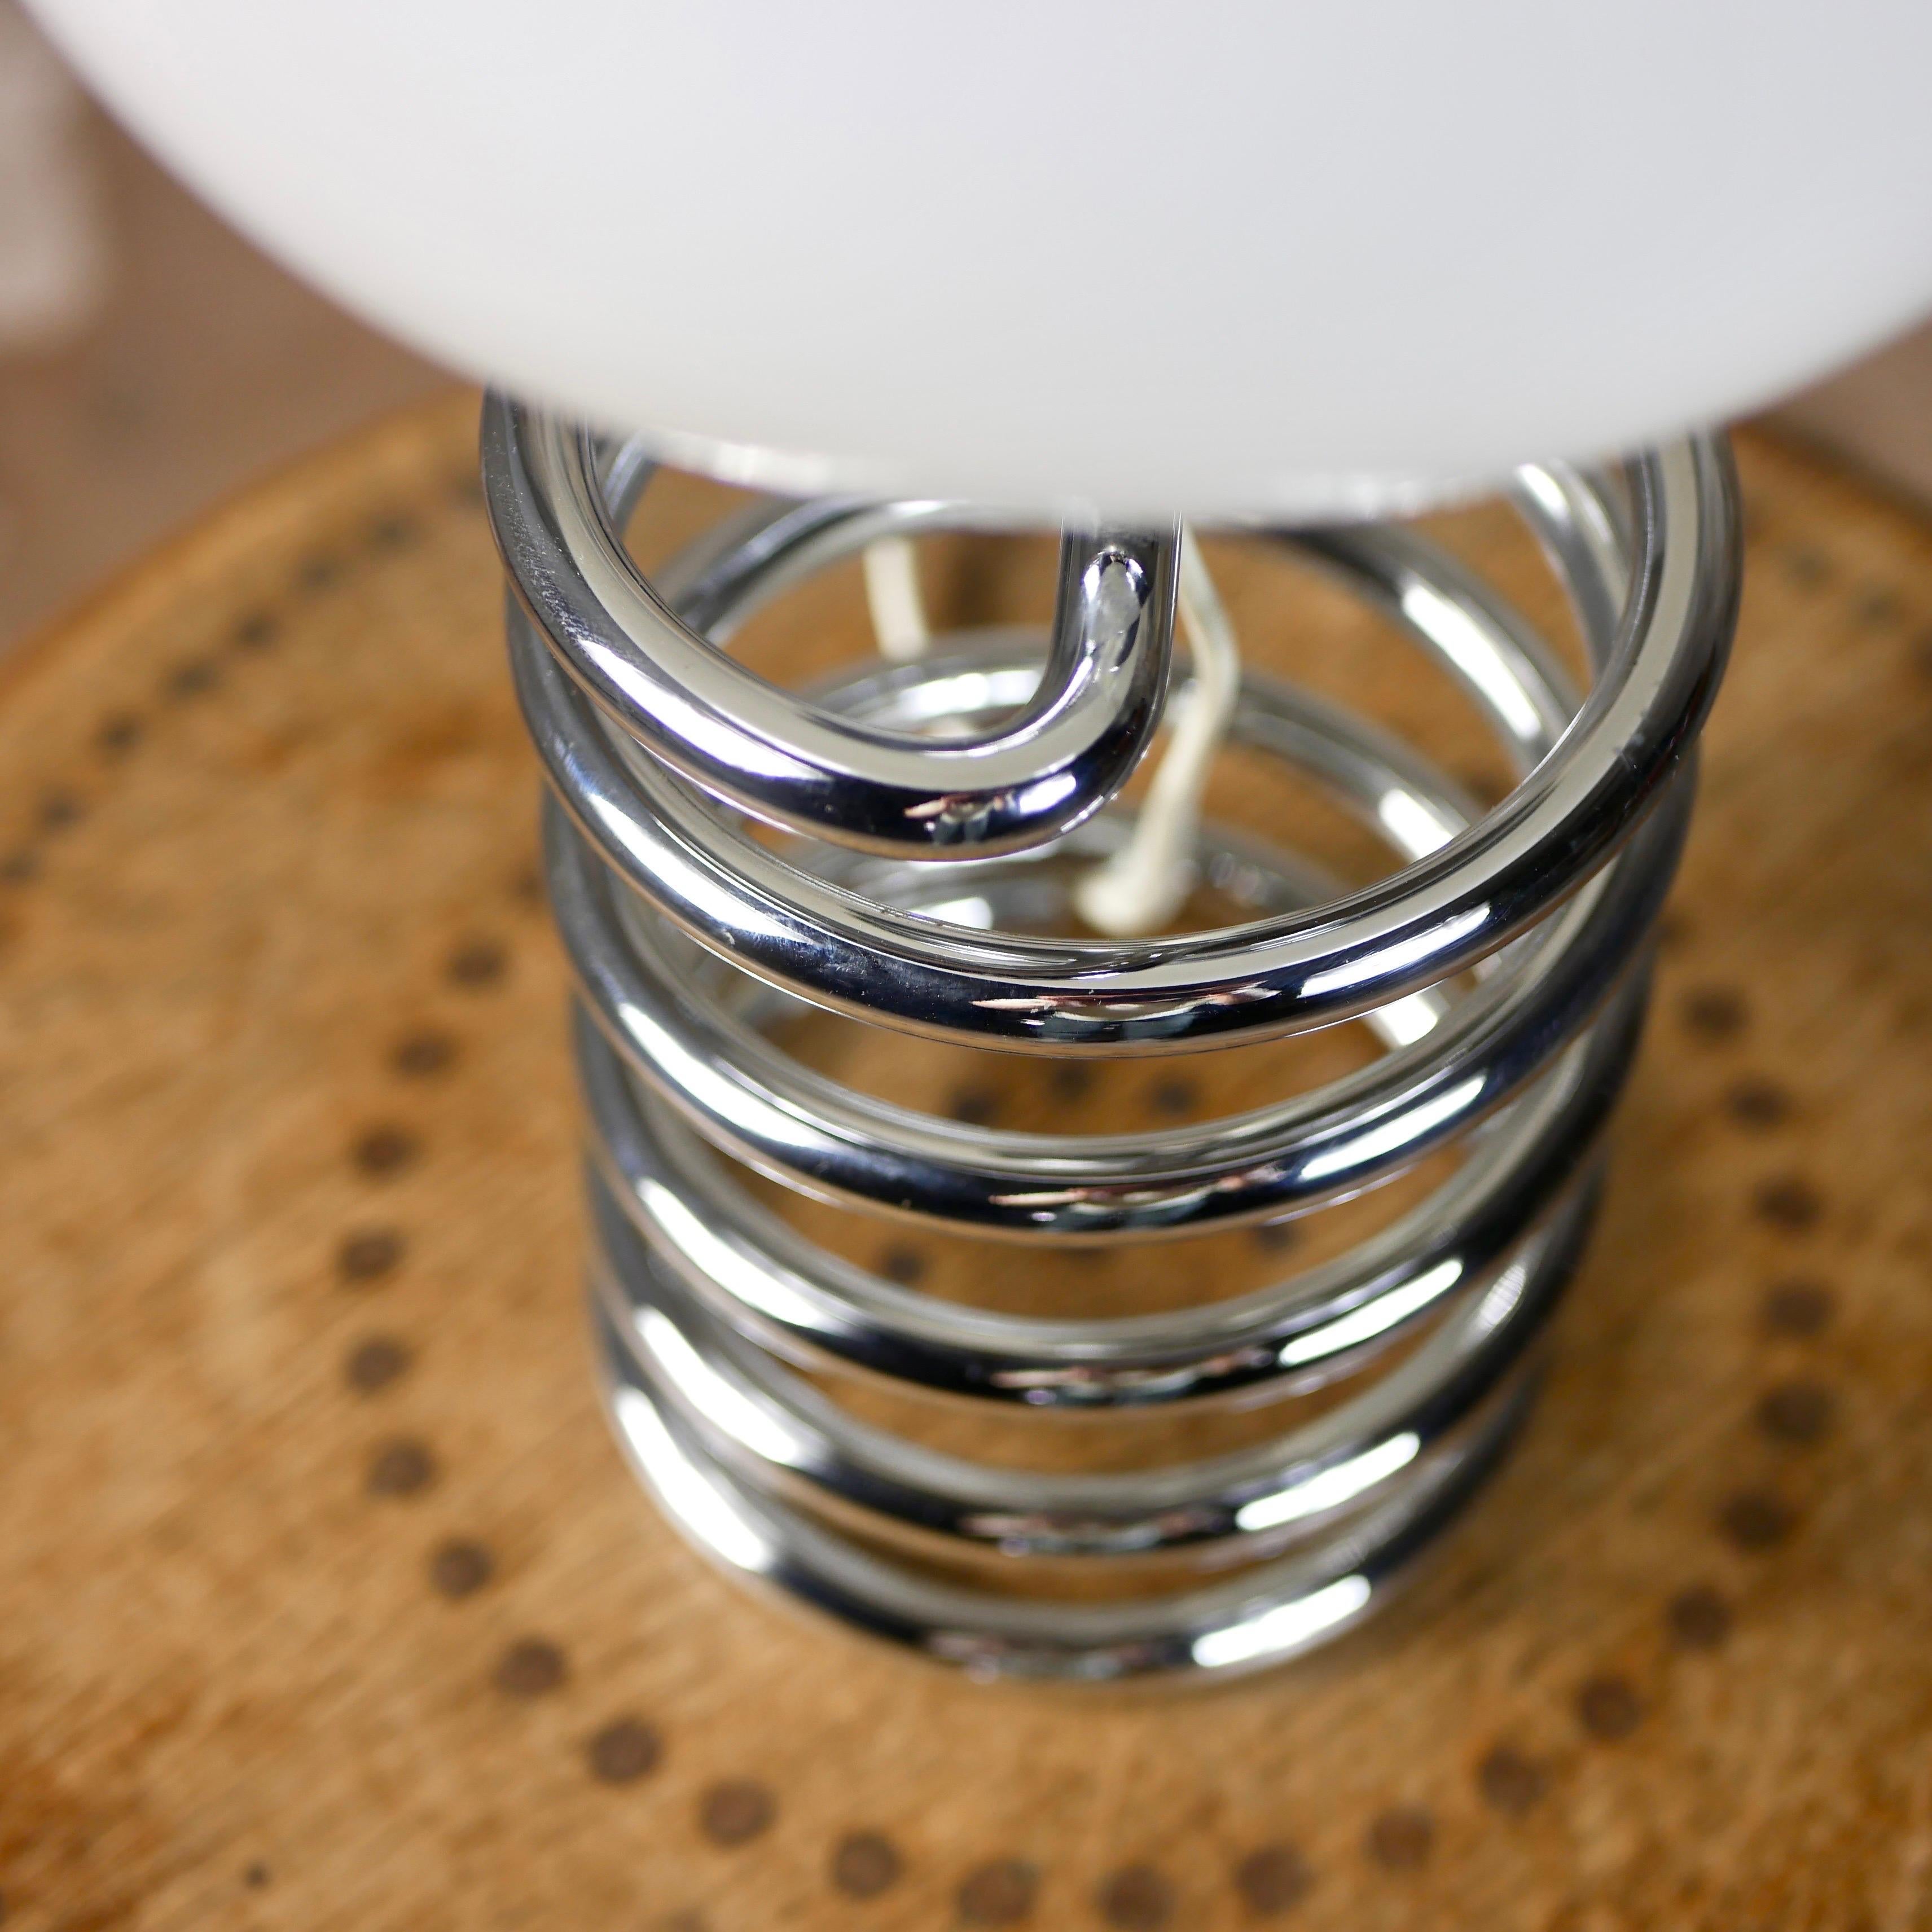 Spring table lamp « Spirale » by Ingo Maurer, made in Germany, 1965 1